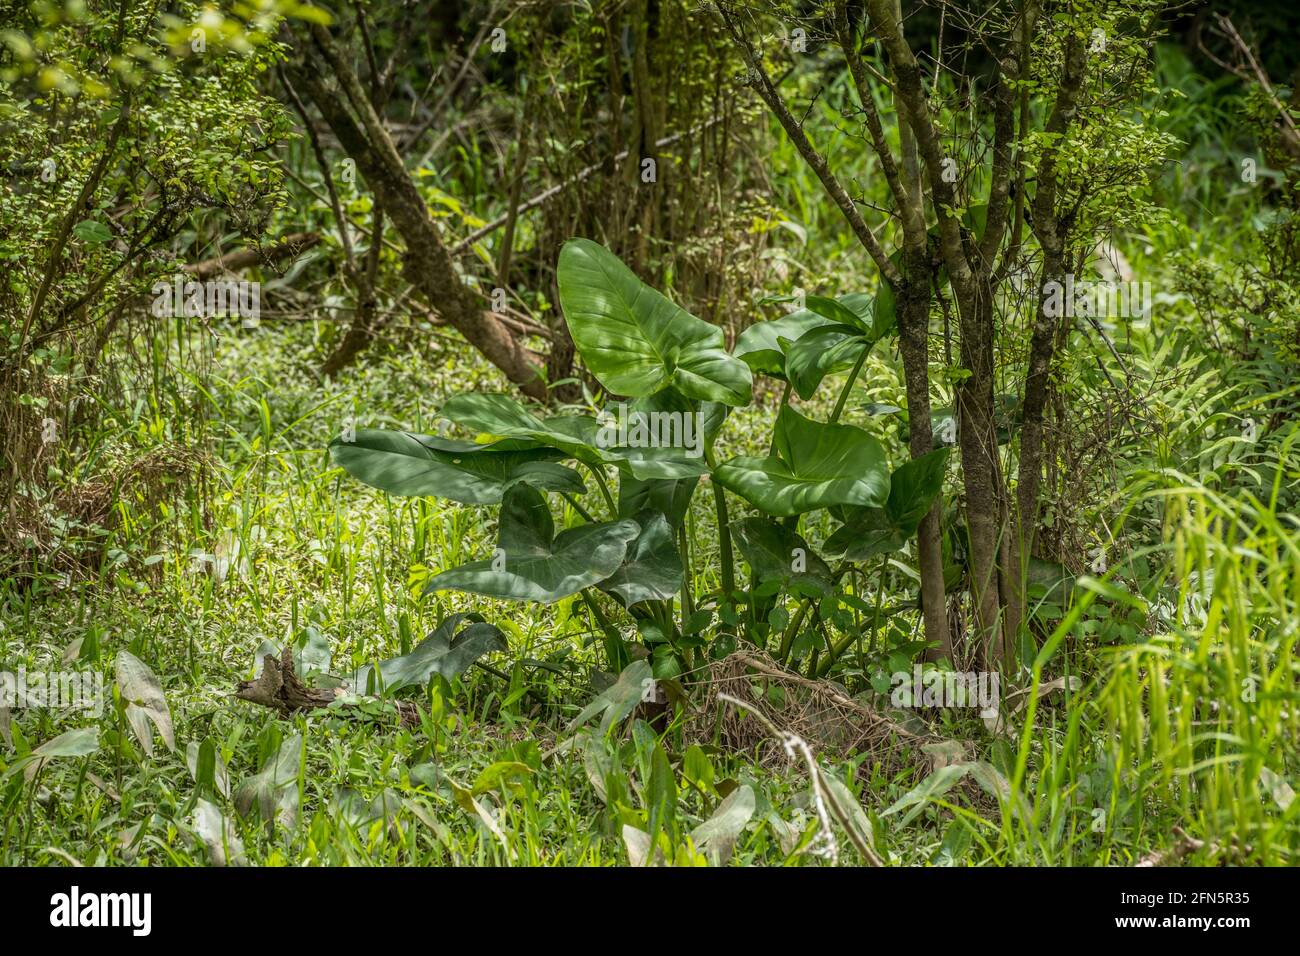 A giant arrowhead plant with huge leaves growing in shallow muddy water with other smaller arrowhead plants and grasses surrounding in the wetlands on Stock Photo